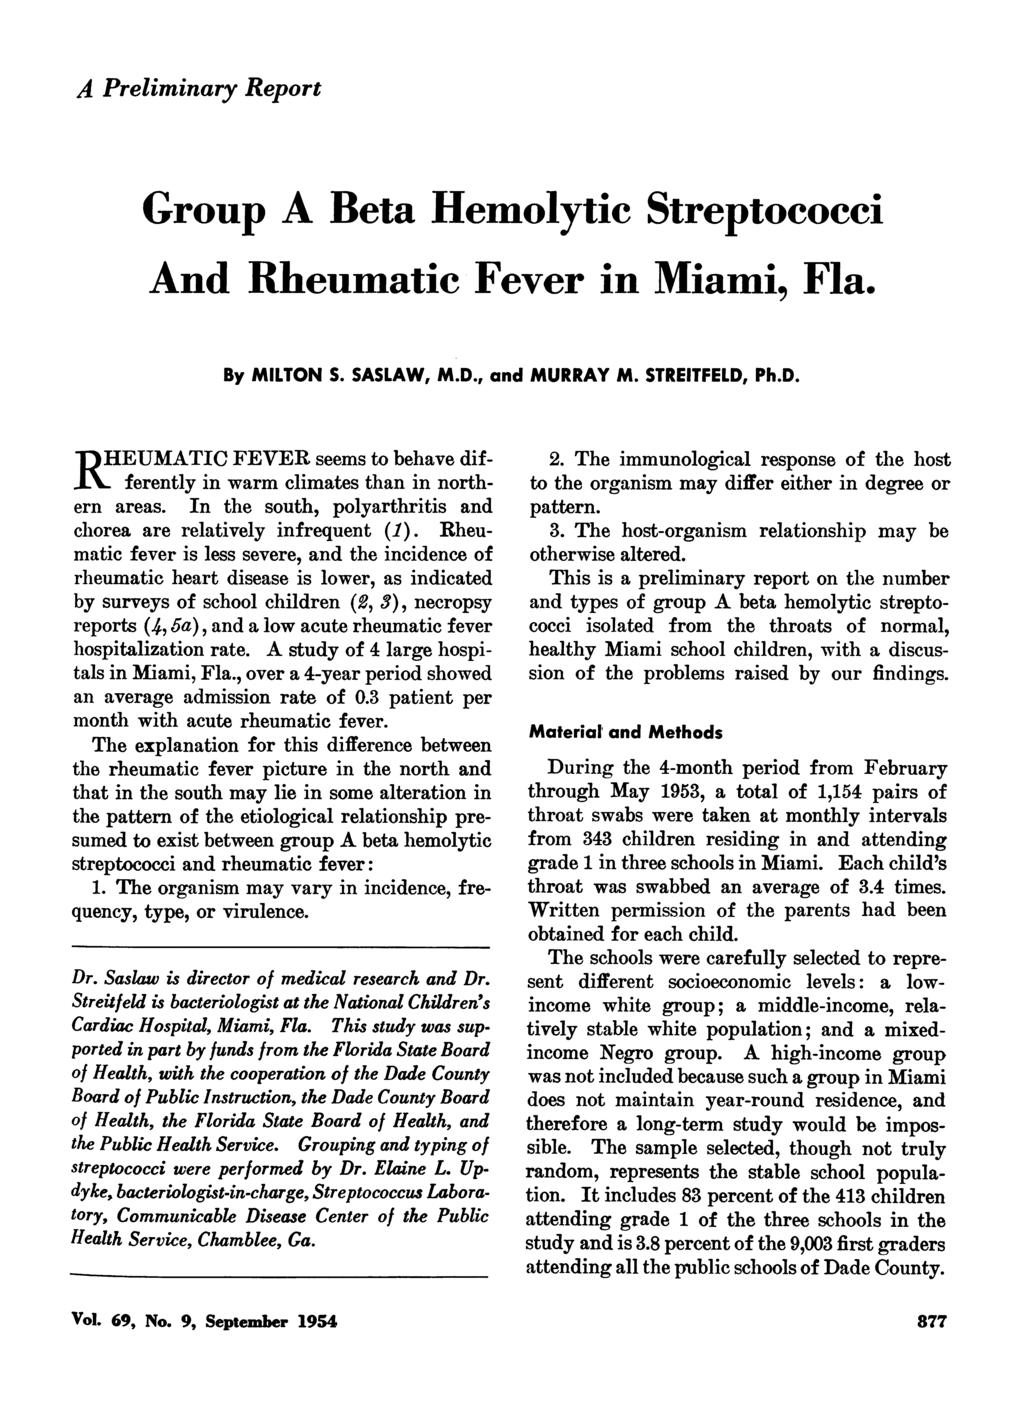 A Preliminary Report Group A Beta Hemolytic Streptococci And Rheumatic Fever in Miami, Fla. By MILTON S. SASLAW, M.D.